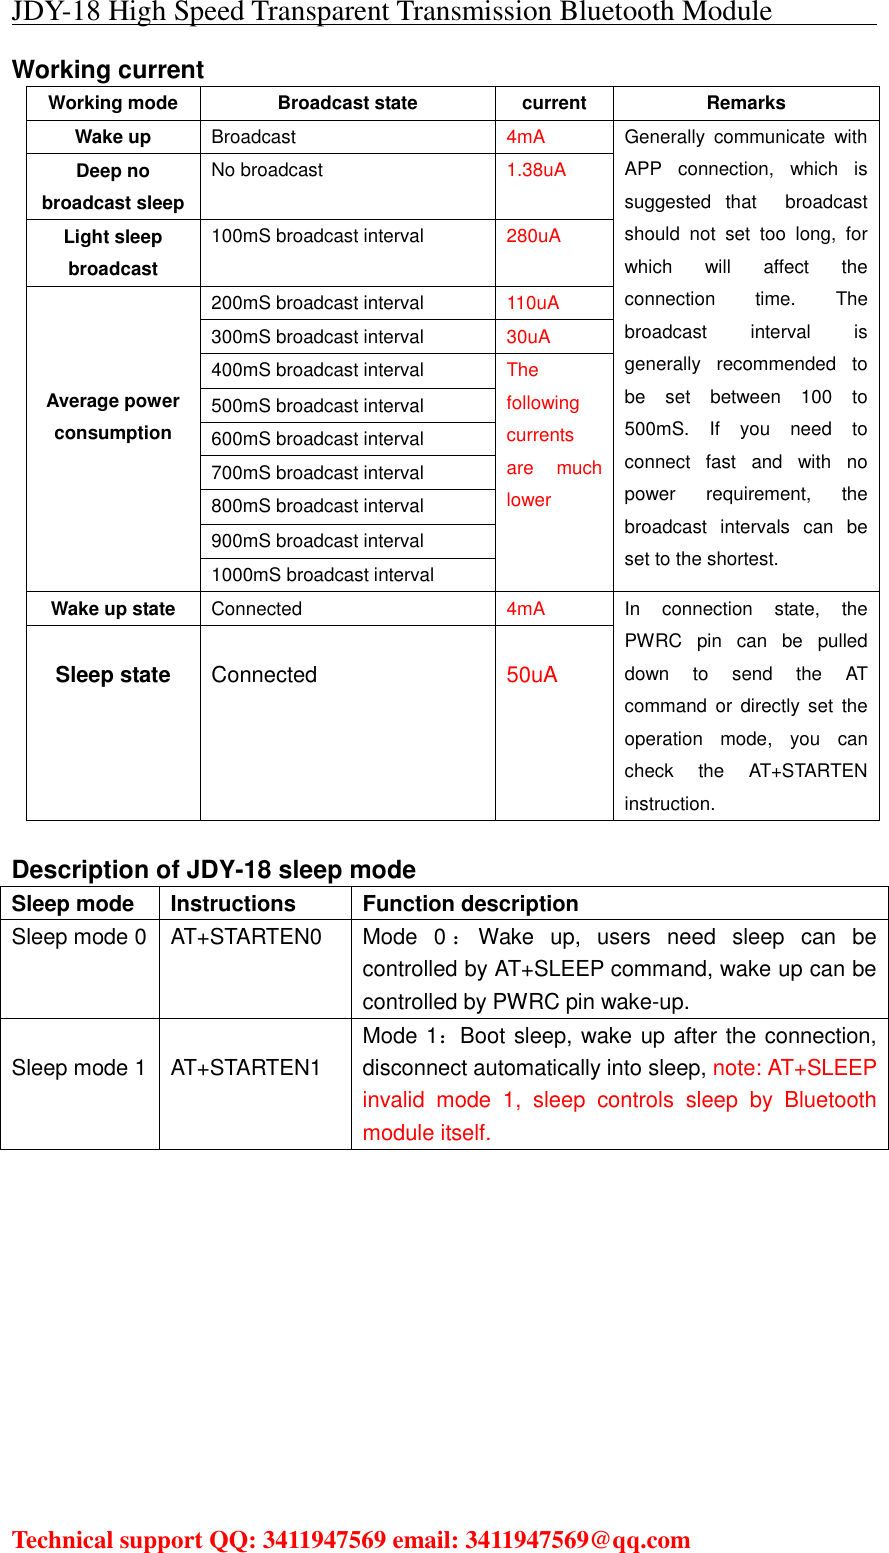 JDY-18 High Speed Transparent Transmission Bluetooth Module                                     Technical support QQ: 3411947569 email: 3411947569@qq.com   Working current  Description of JDY-18 sleep mode Sleep mode  Instructions  Function description Sleep mode 0  AT+STARTEN0  Mode  0 ：Wake  up,  users  need  sleep  can  be controlled by AT+SLEEP command, wake up can be controlled by PWRC pin wake-up.  Sleep mode 1  AT+STARTEN1 Mode 1：Boot sleep, wake up after the connection, disconnect automatically into sleep, note: AT+SLEEP invalid  mode  1,  sleep  controls  sleep  by  Bluetooth module itself.          Working mode  Broadcast state  current  Remarks Wake up  Broadcast  4mA Generally  communicate  with APP  connection,  which  is suggested  that    broadcast should  not  set  too  long,  for which  will  affect  the connection  time.  The broadcast  interval  is generally  recommended  to be  set  between  100  to 500mS.  If  you  need  to connect  fast  and  with  no power  requirement,  the broadcast  intervals  can  be set to the shortest. Deep no broadcast sleep No broadcast  1.38uA Light sleep broadcast 100mS broadcast interval  280uA    Average power consumption 200mS broadcast interval  110uA 300mS broadcast interval  30uA 400mS broadcast interval  The following currents are  much lower 500mS broadcast interval 600mS broadcast interval 700mS broadcast interval 800mS broadcast interval 900mS broadcast interval 1000mS broadcast interval Wake up state  Connected  4mA In  connection  state,  the PWRC  pin  can  be  pulled down  to  send  the  AT command  or  directly  set  the operation  mode,  you  can check  the  AT+STARTEN instruction.  Sleep state  Connected  50uA 